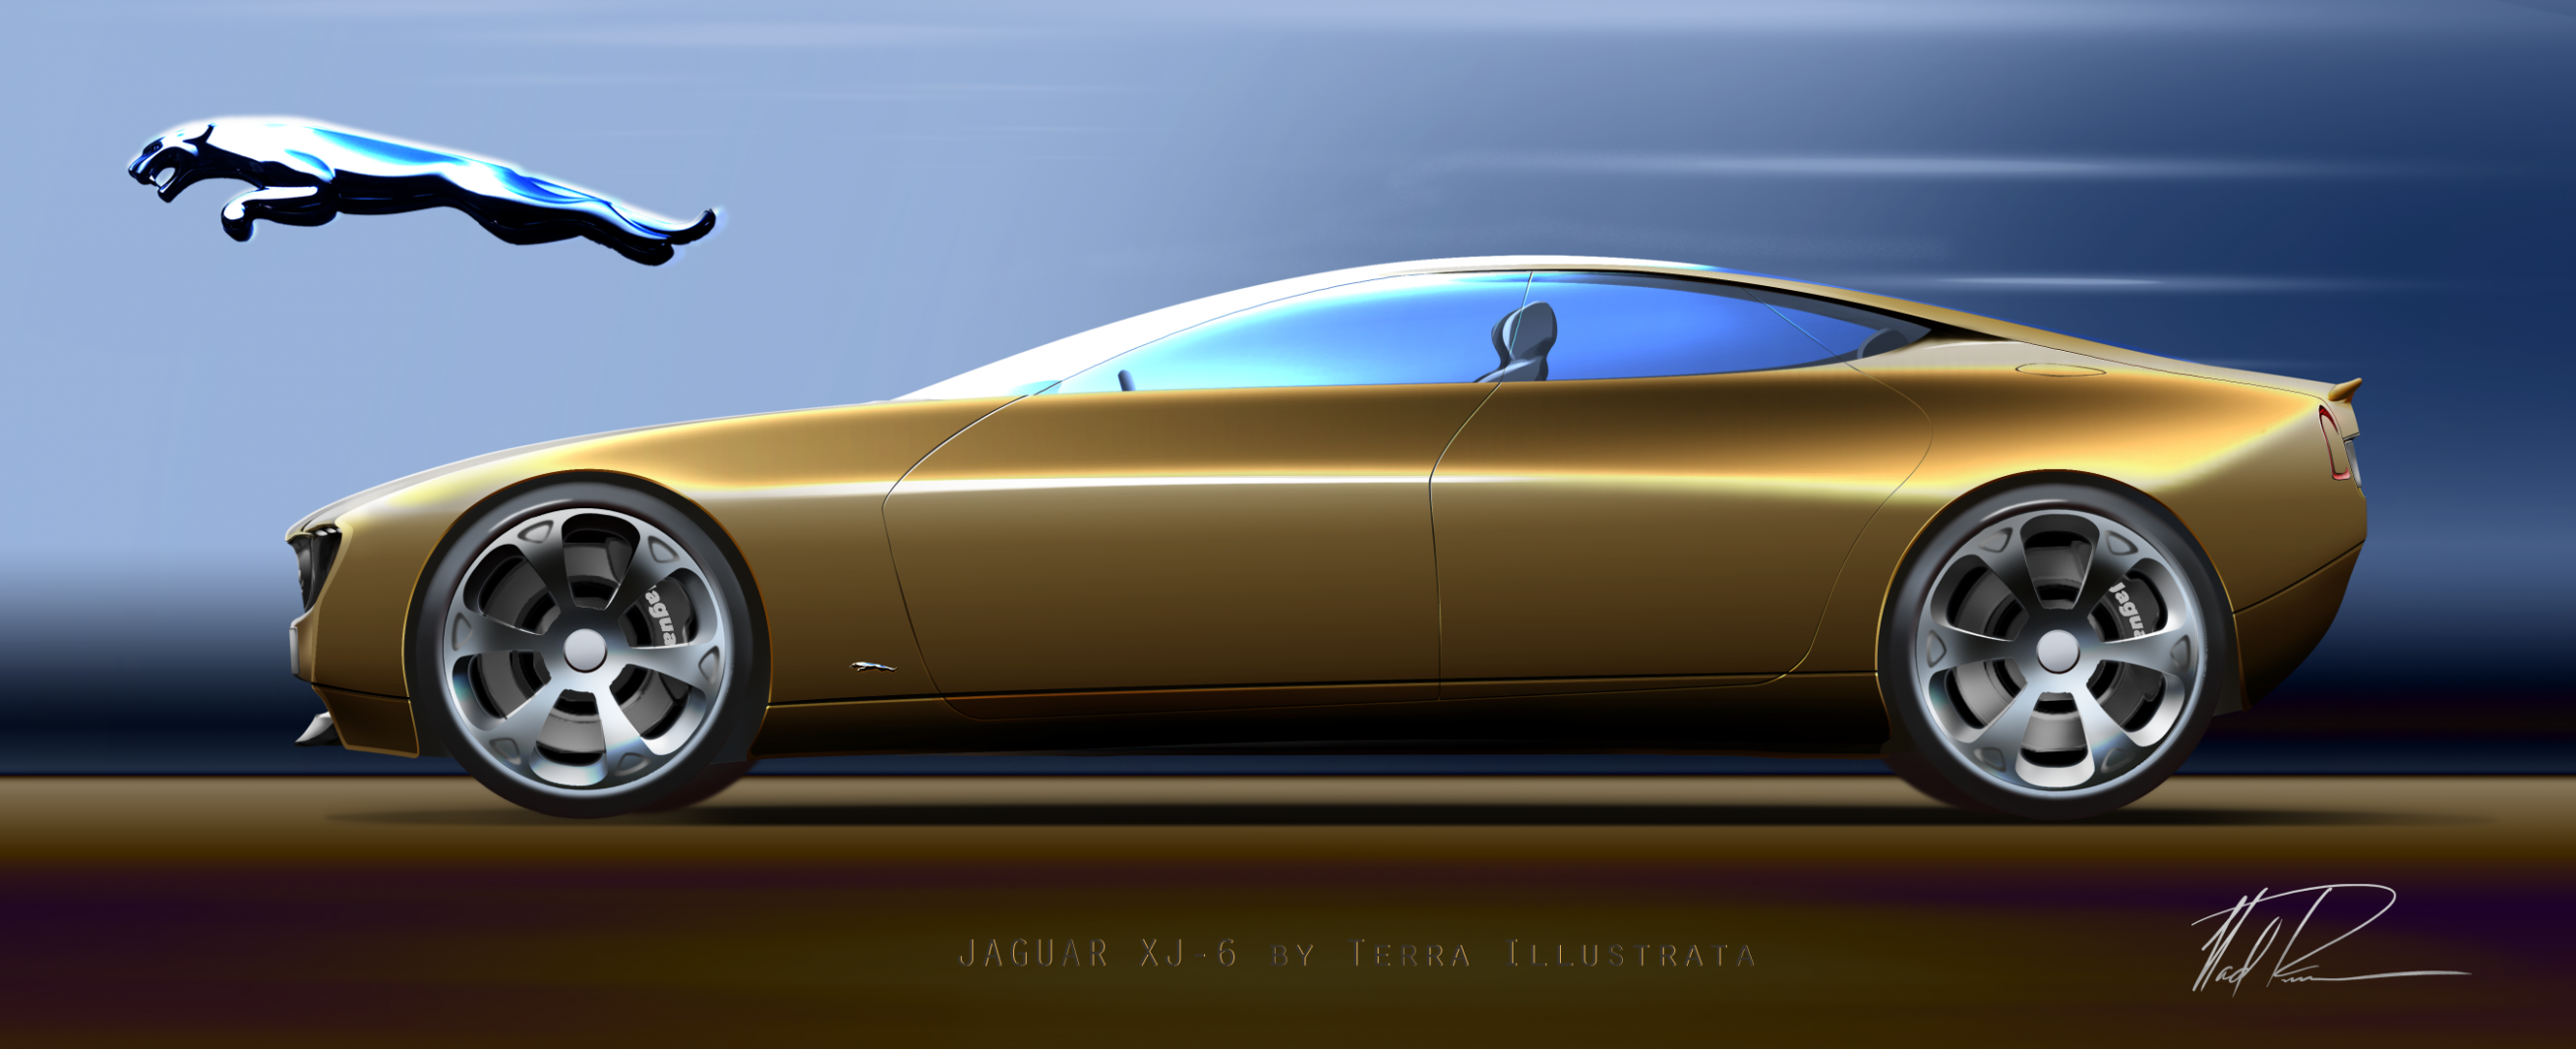 Redesign and Concept 2022 Jaguar Xj Images